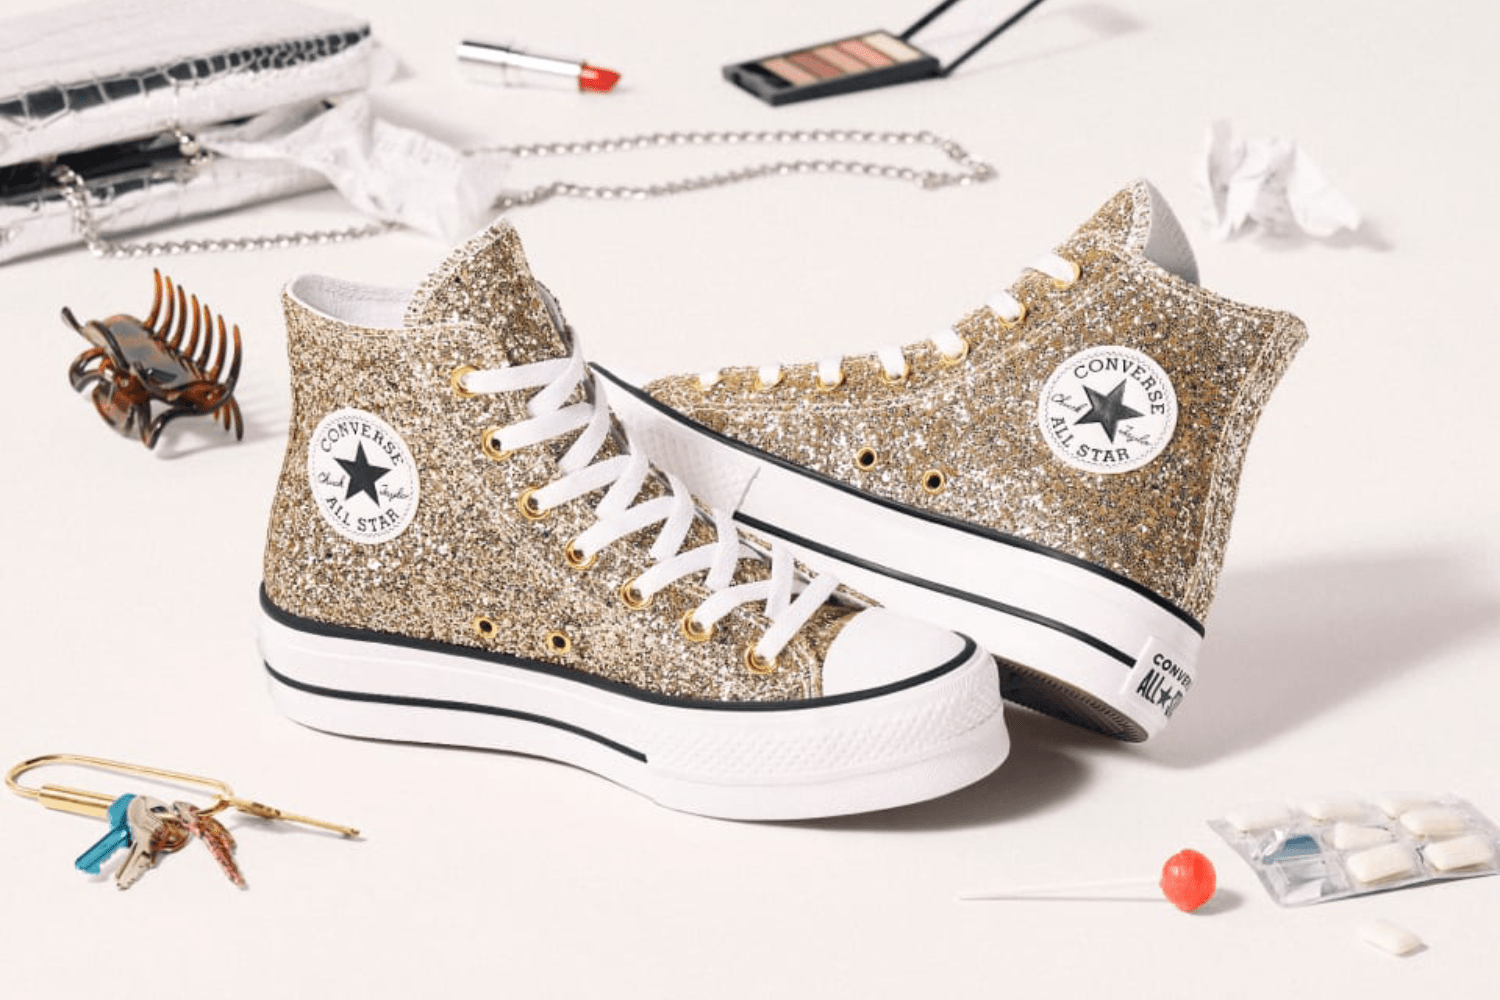 Create your Converse By You design with 25% off during Singles Day